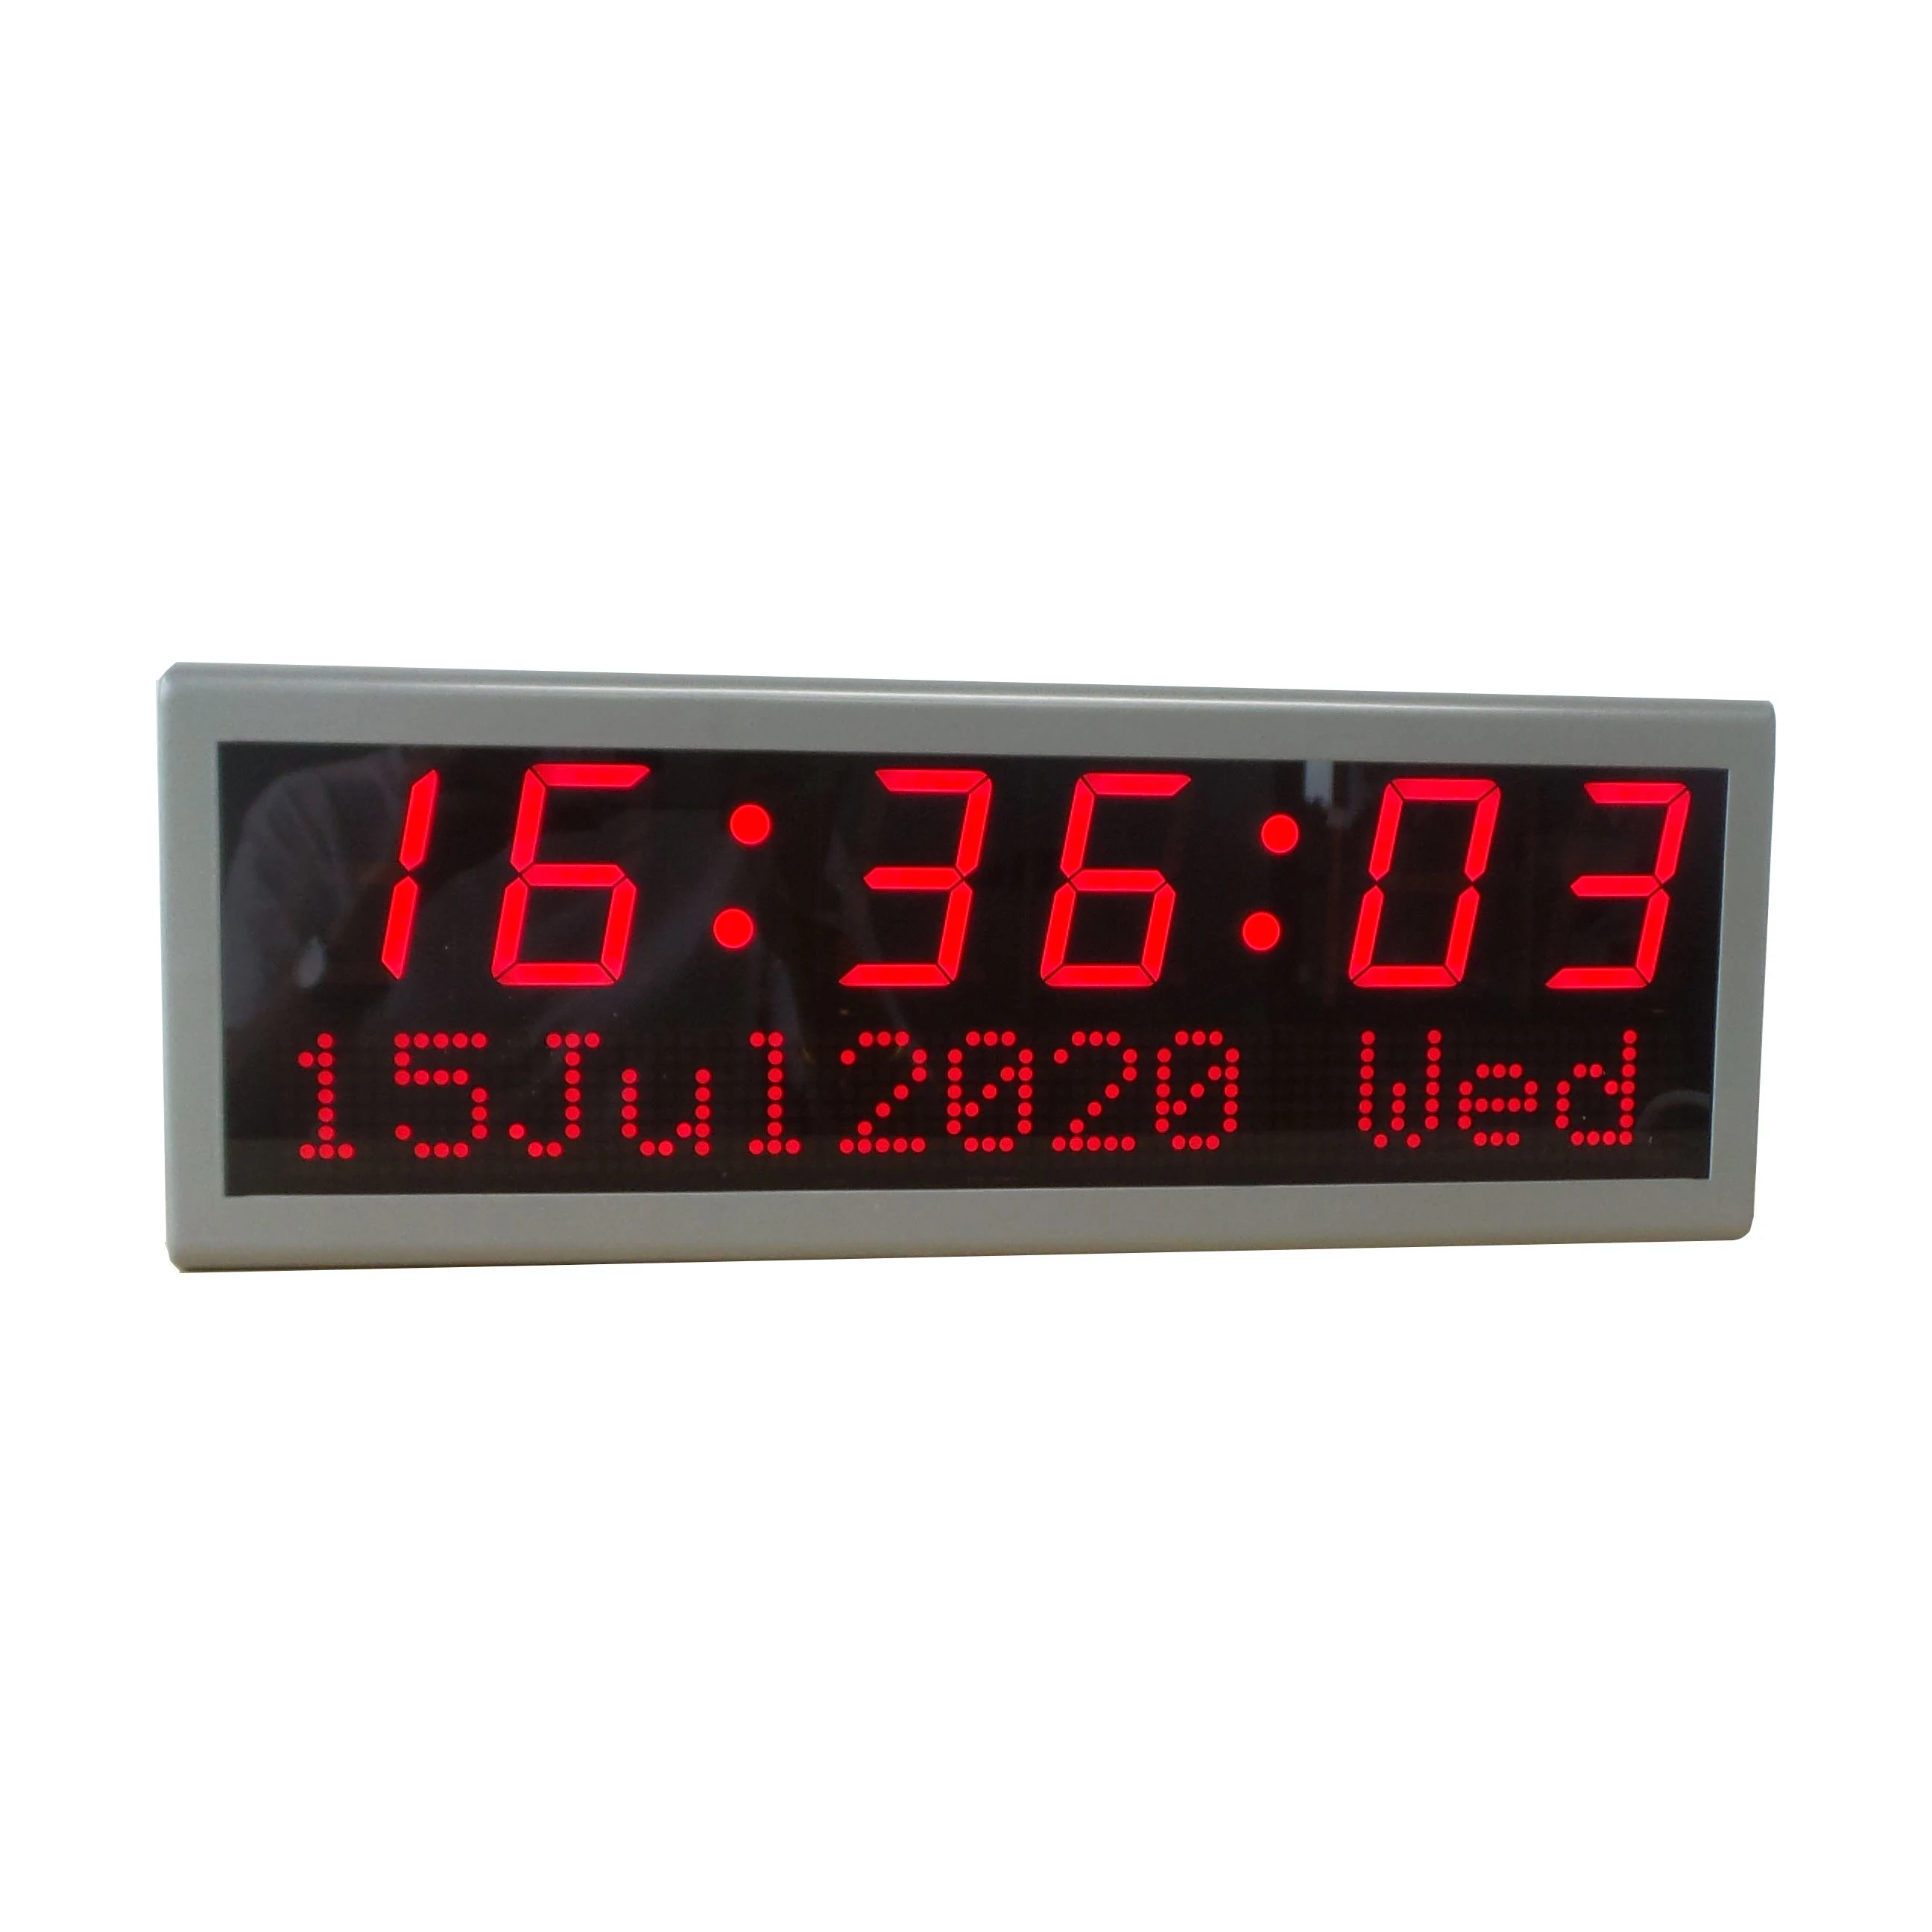 Synchronized Time System, Digital NTP PoE Clock with Stainless Steel Case